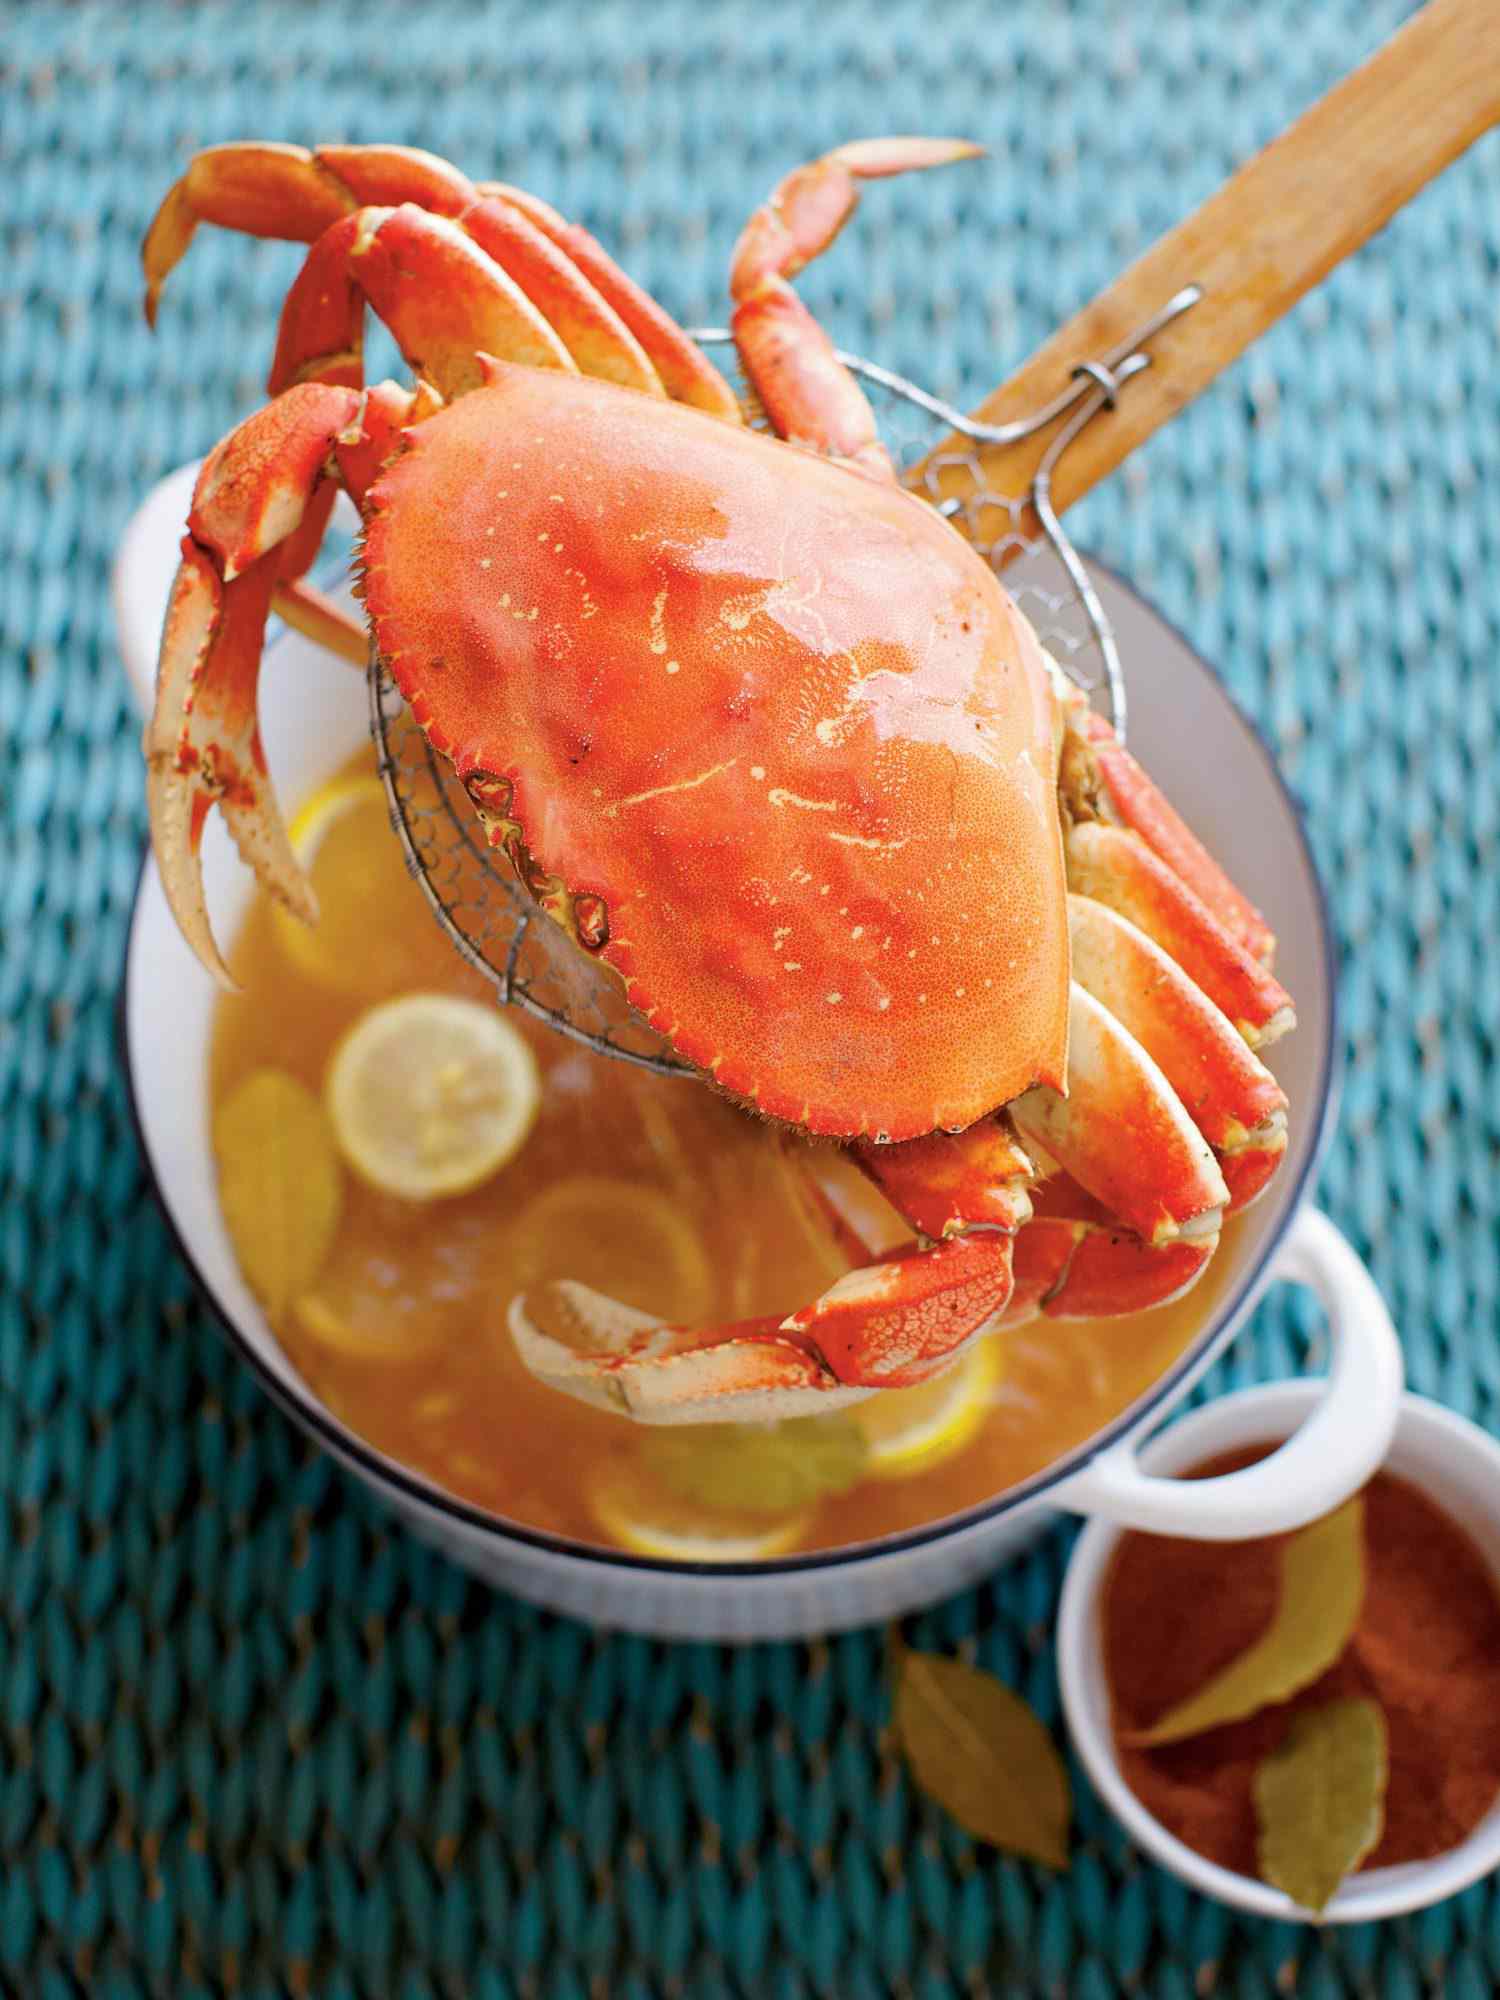 How To Store Cooked Crabs